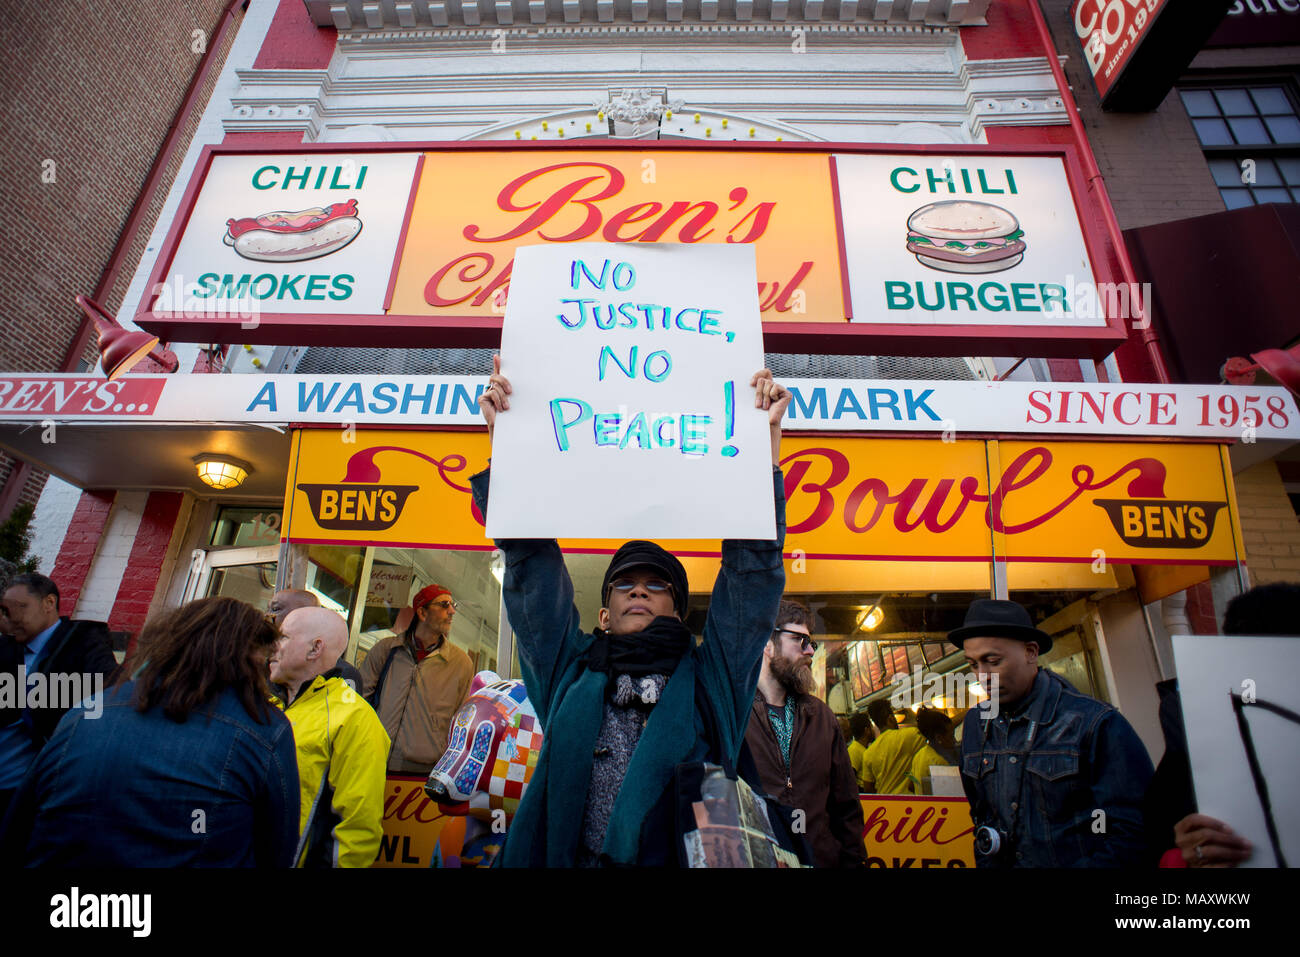 Washington, District of Columbia, USA. 4th Apr, 2018. Activists gather at Ben's Chili Bowl to commemorate the 50th anniversary of Dr. Martin Luther King Jr.'s assassination. On this date in 1968, police allowed the historic restaurant to remain open during rioting so that organizers and residents could meet and eat. Credit: Erin Scott/ZUMA Wire/Alamy Live News Stock Photo